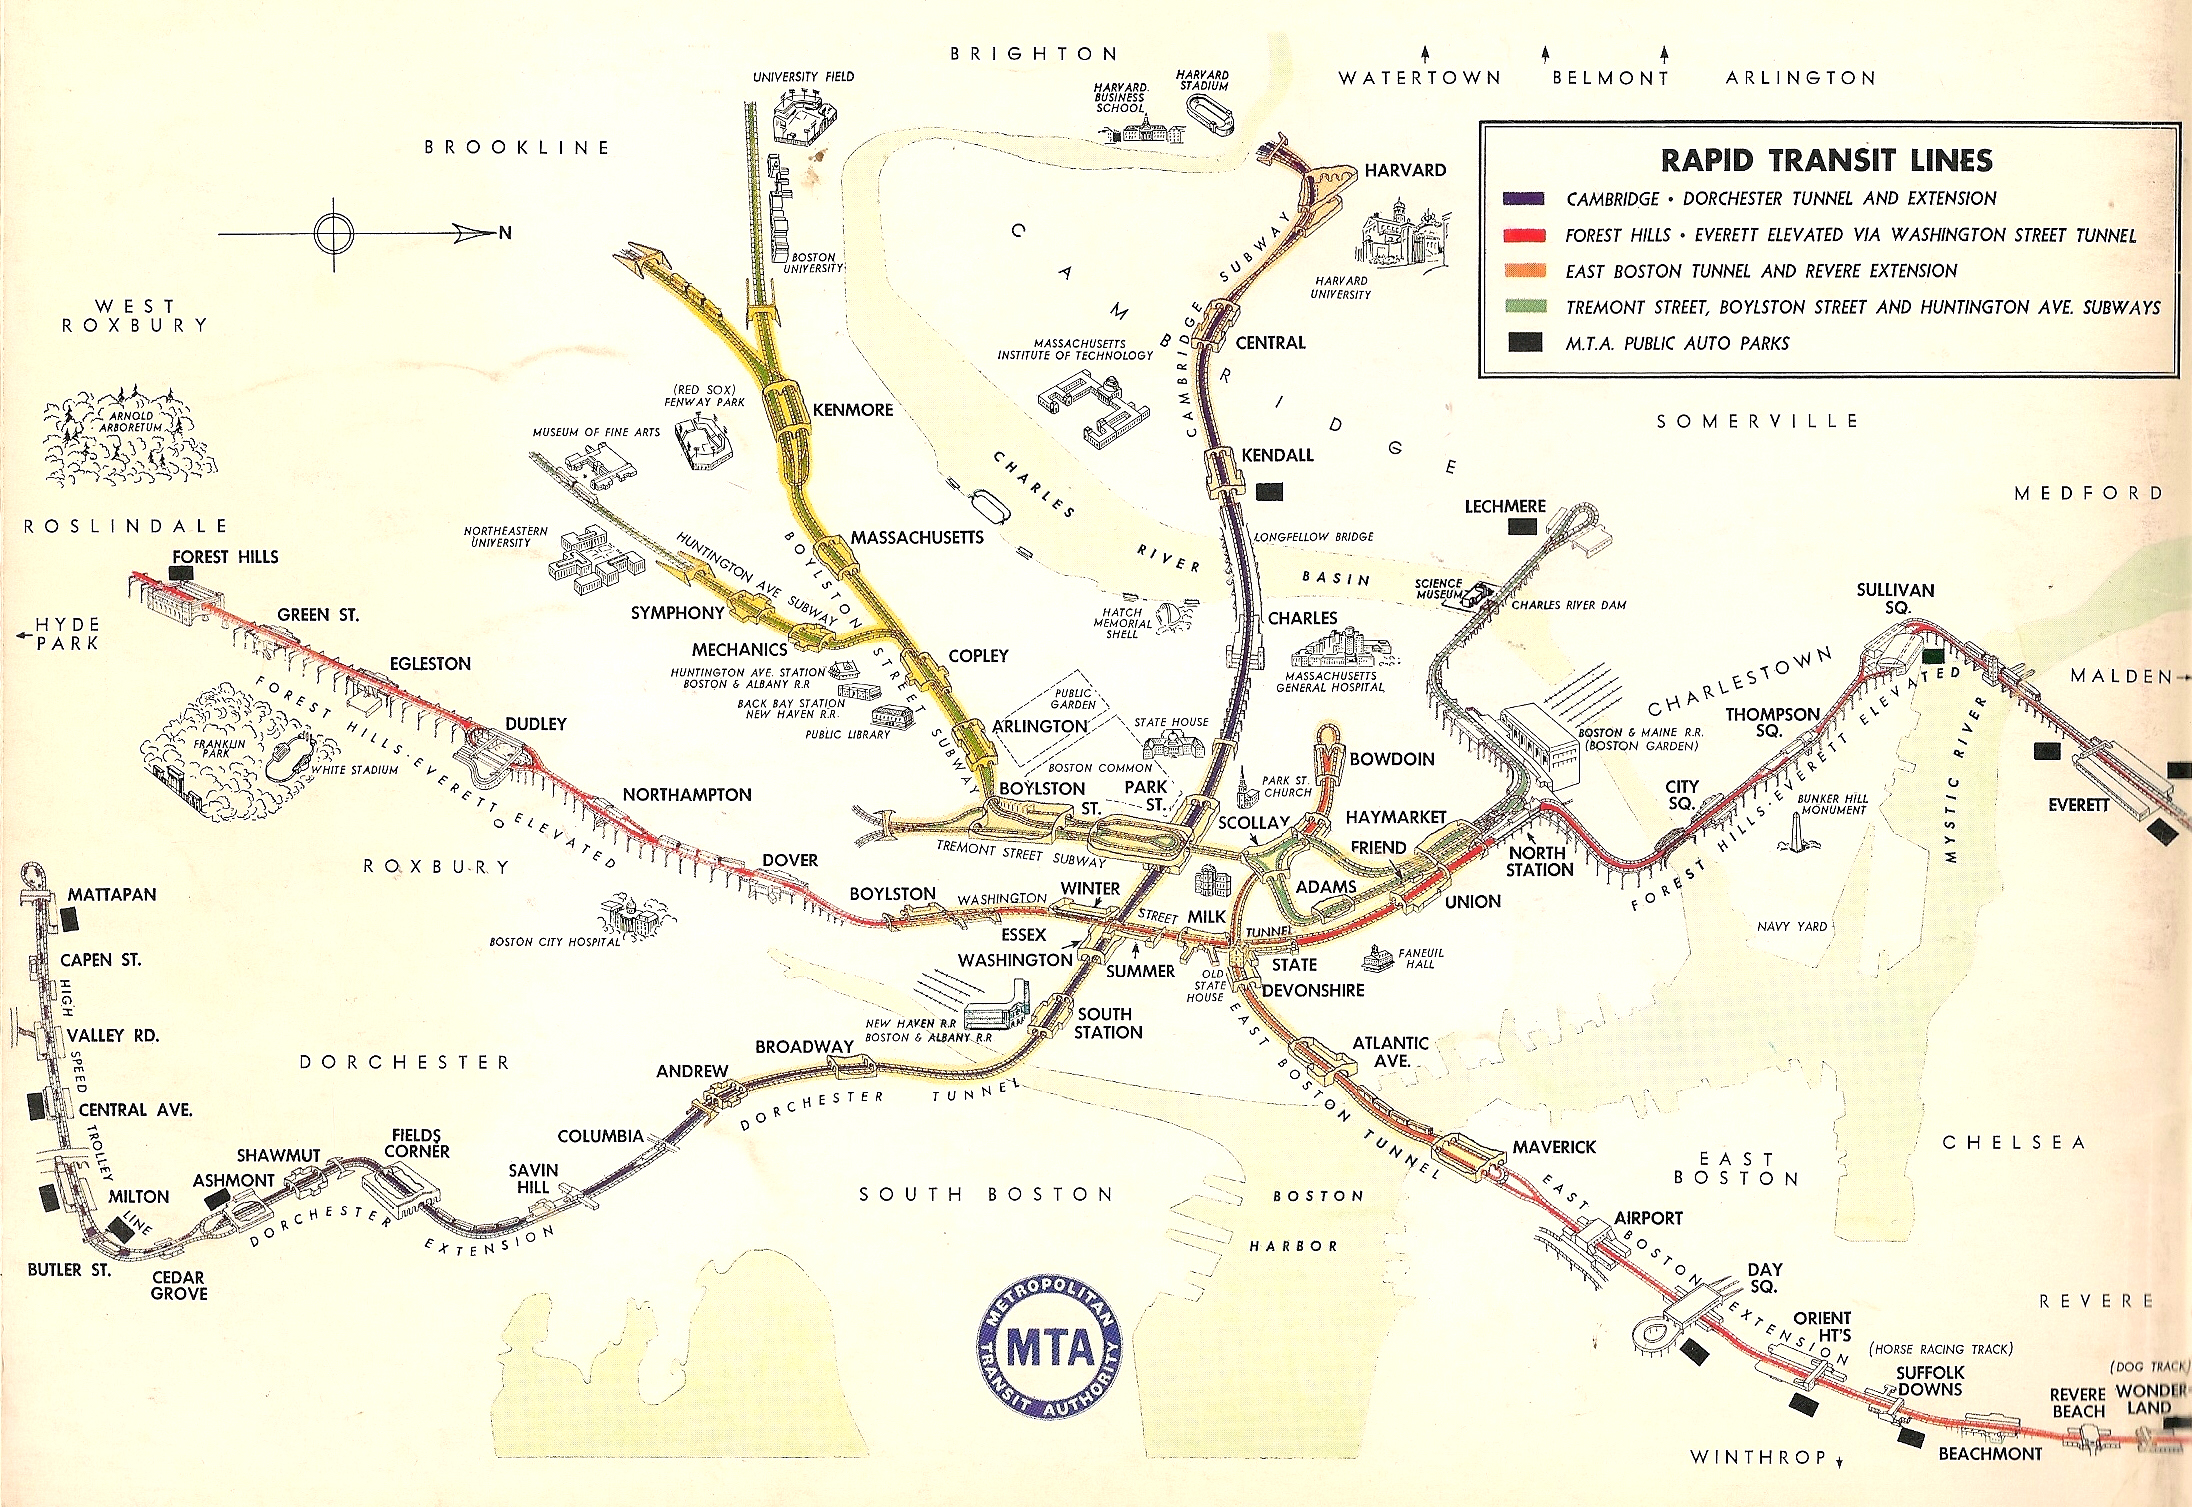 Image of old T map with illustrations of each station